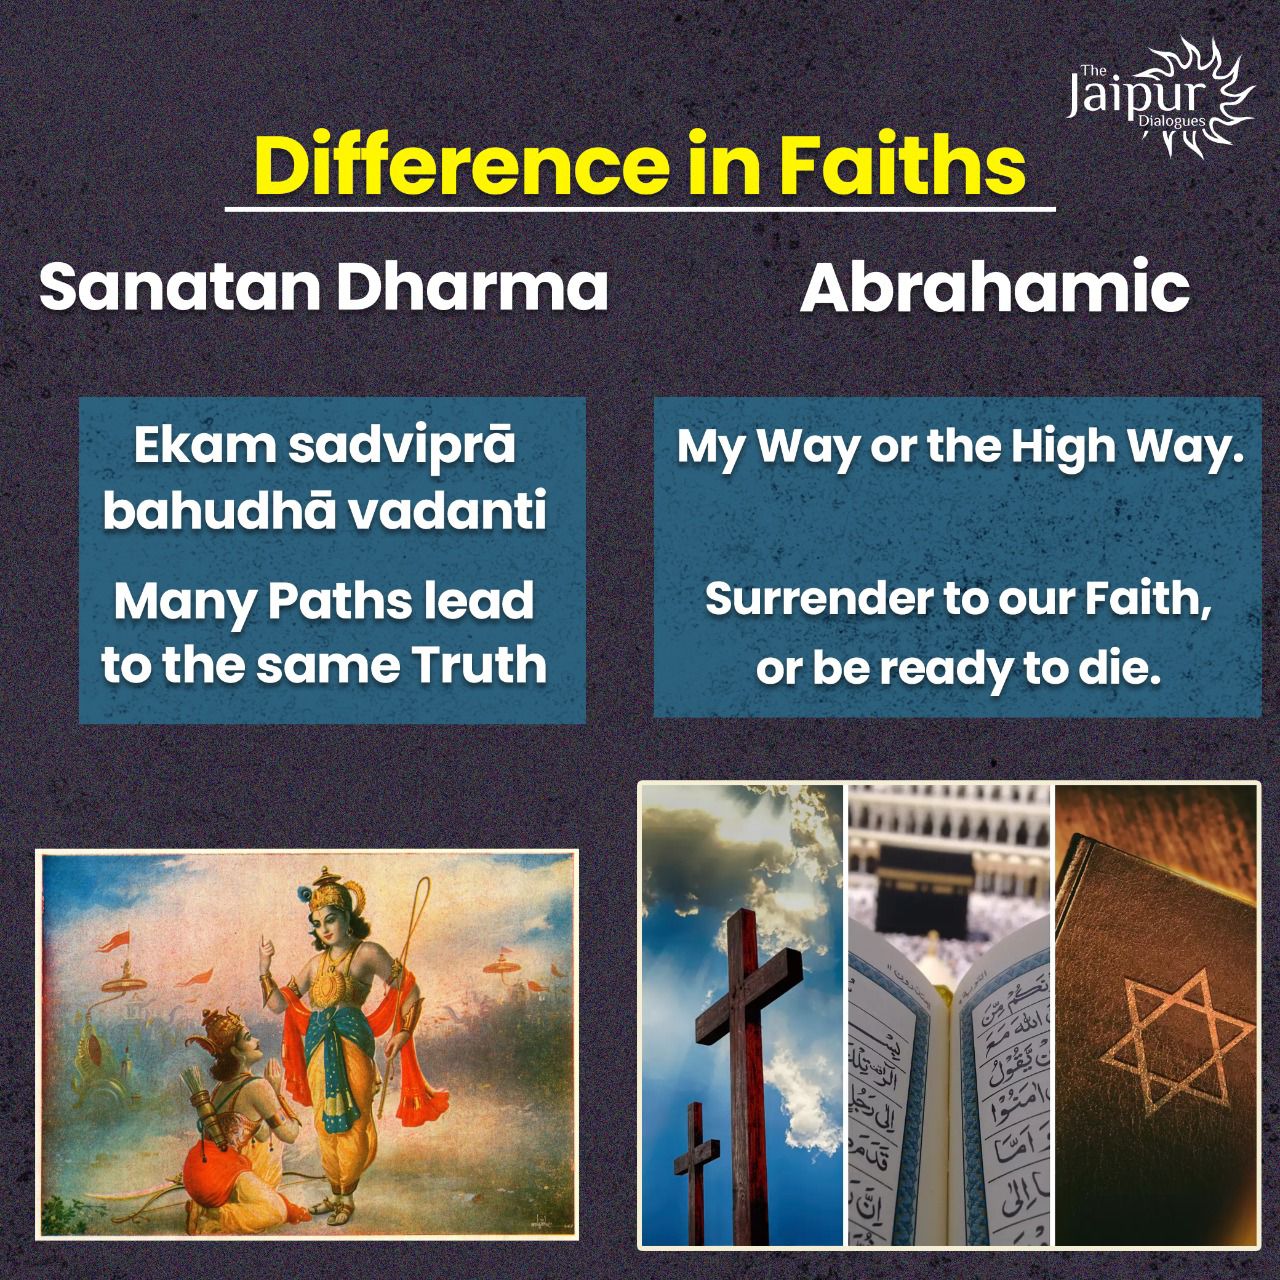 And yet Sanatan Dharma is Totalitarian and Abrahamic Faiths are - Liberal